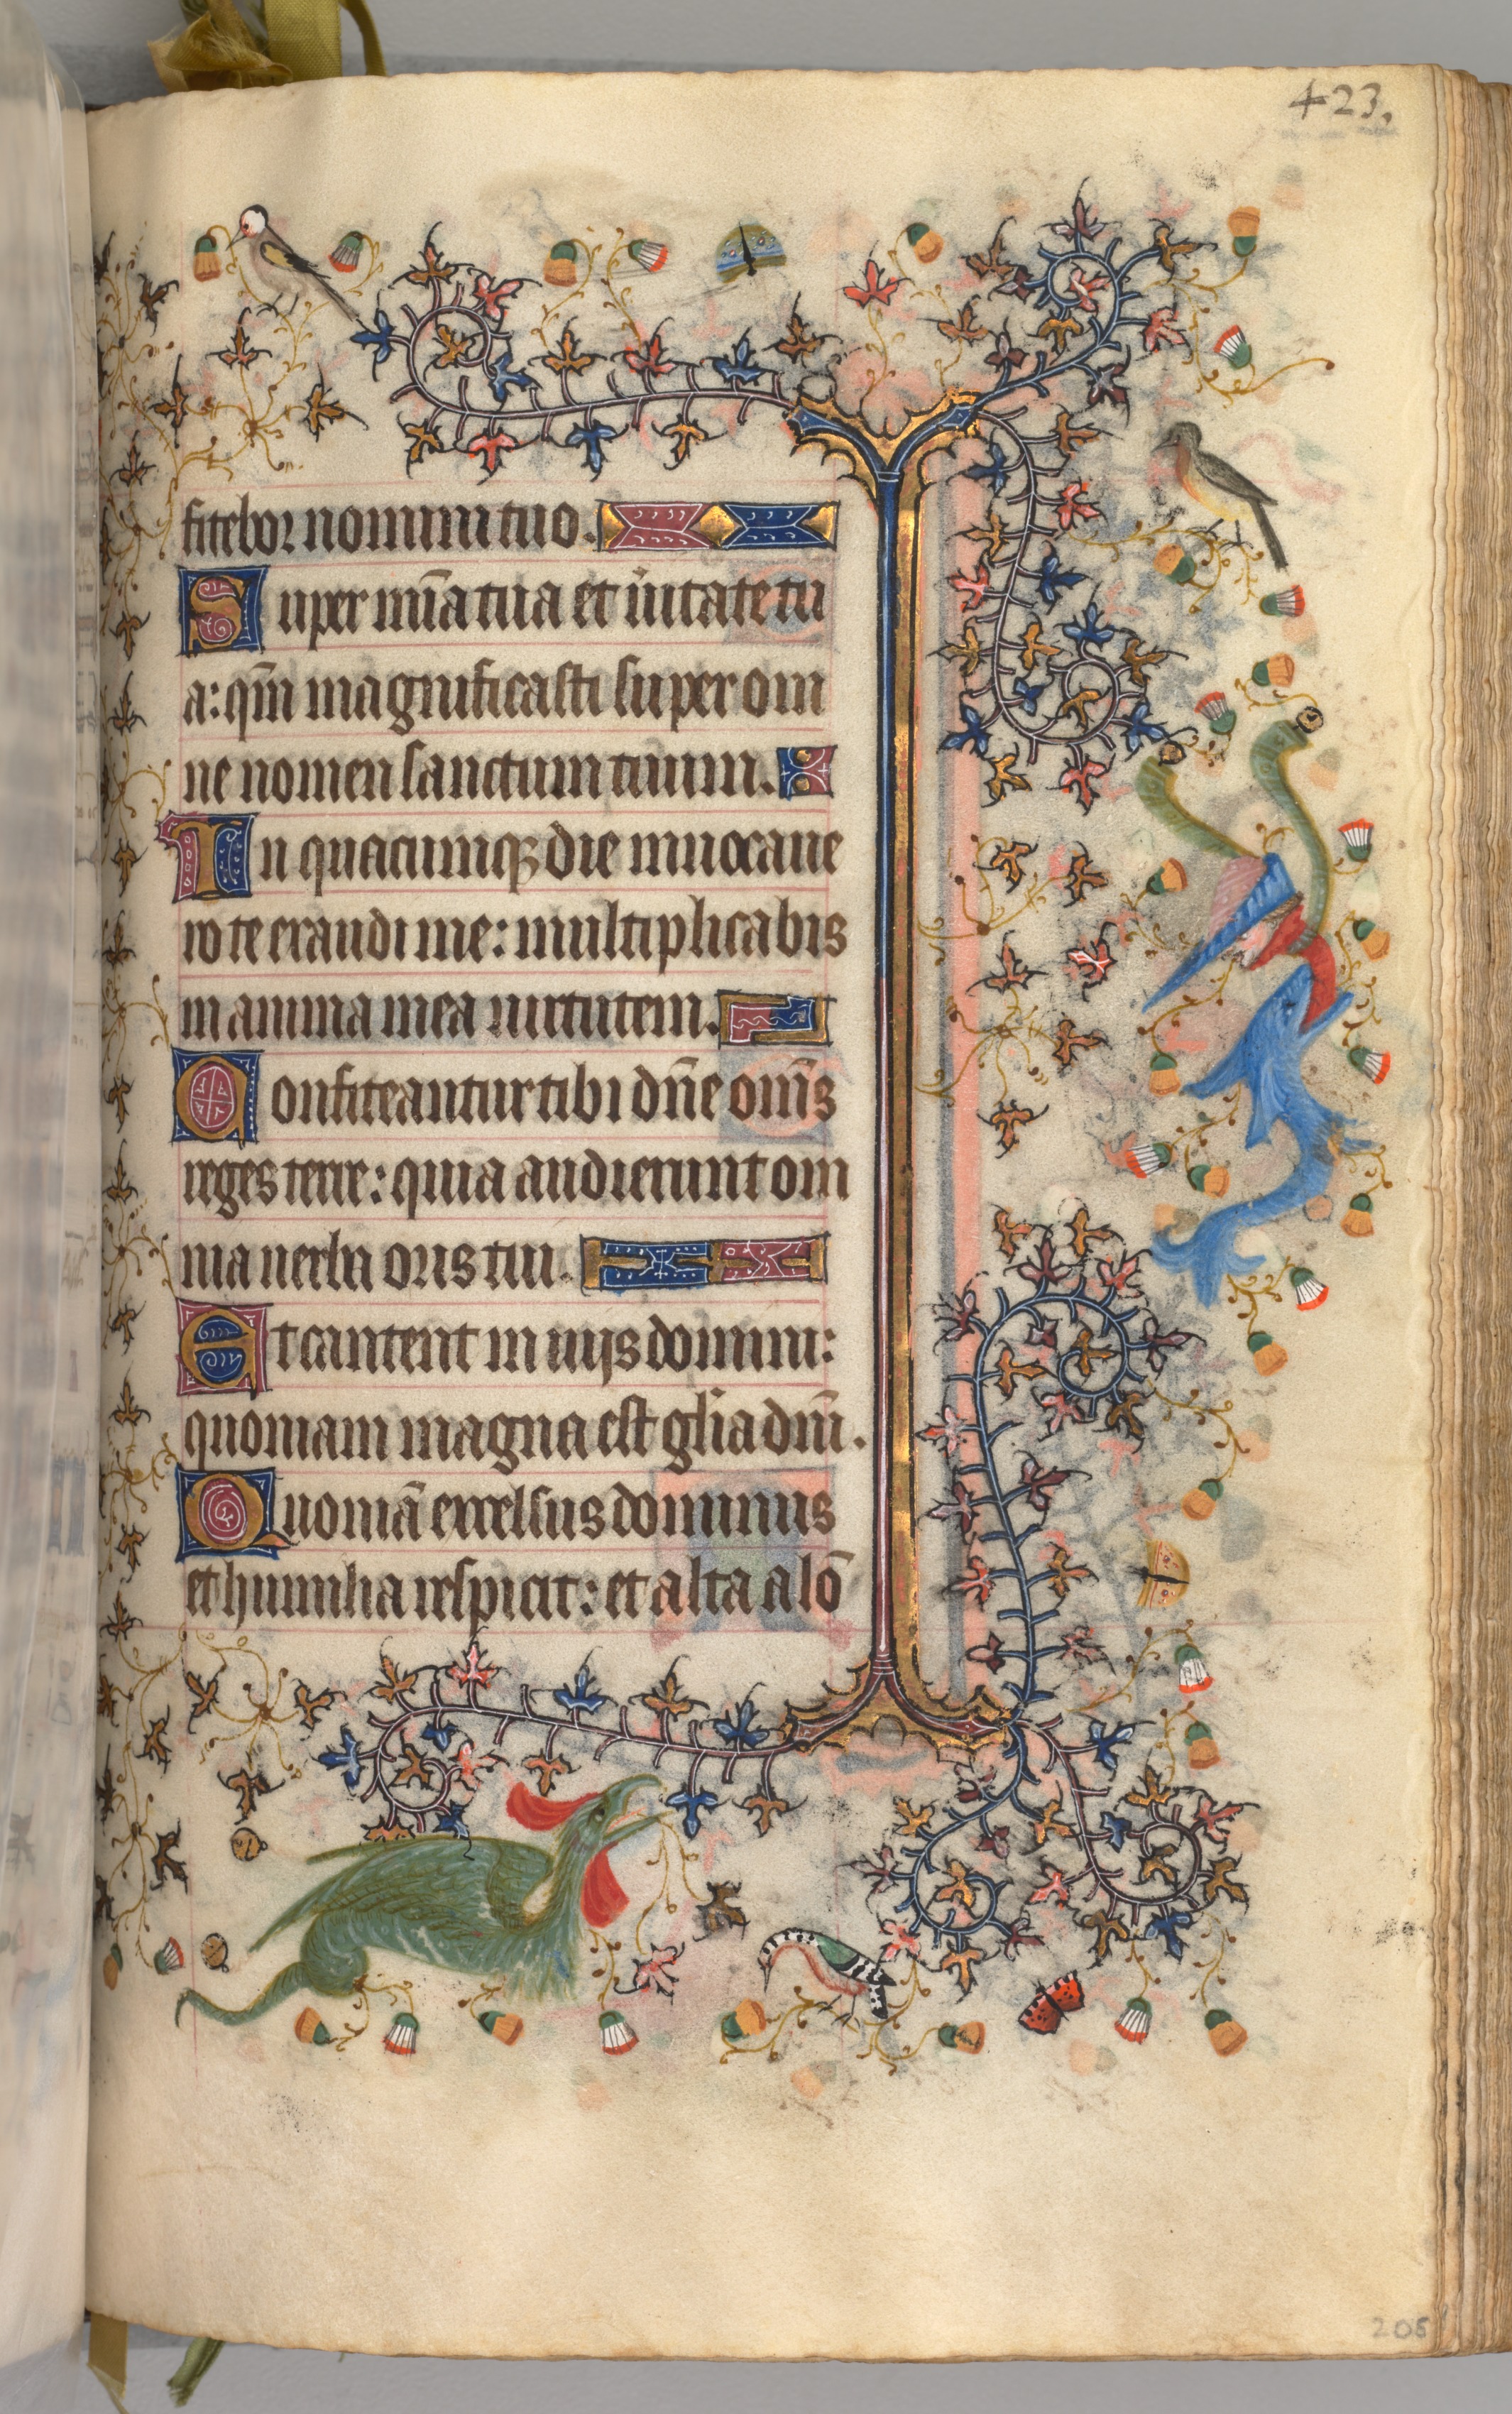 Hours of Charles the Noble, King of Navarre (1361-1425): fol. 206r, Text